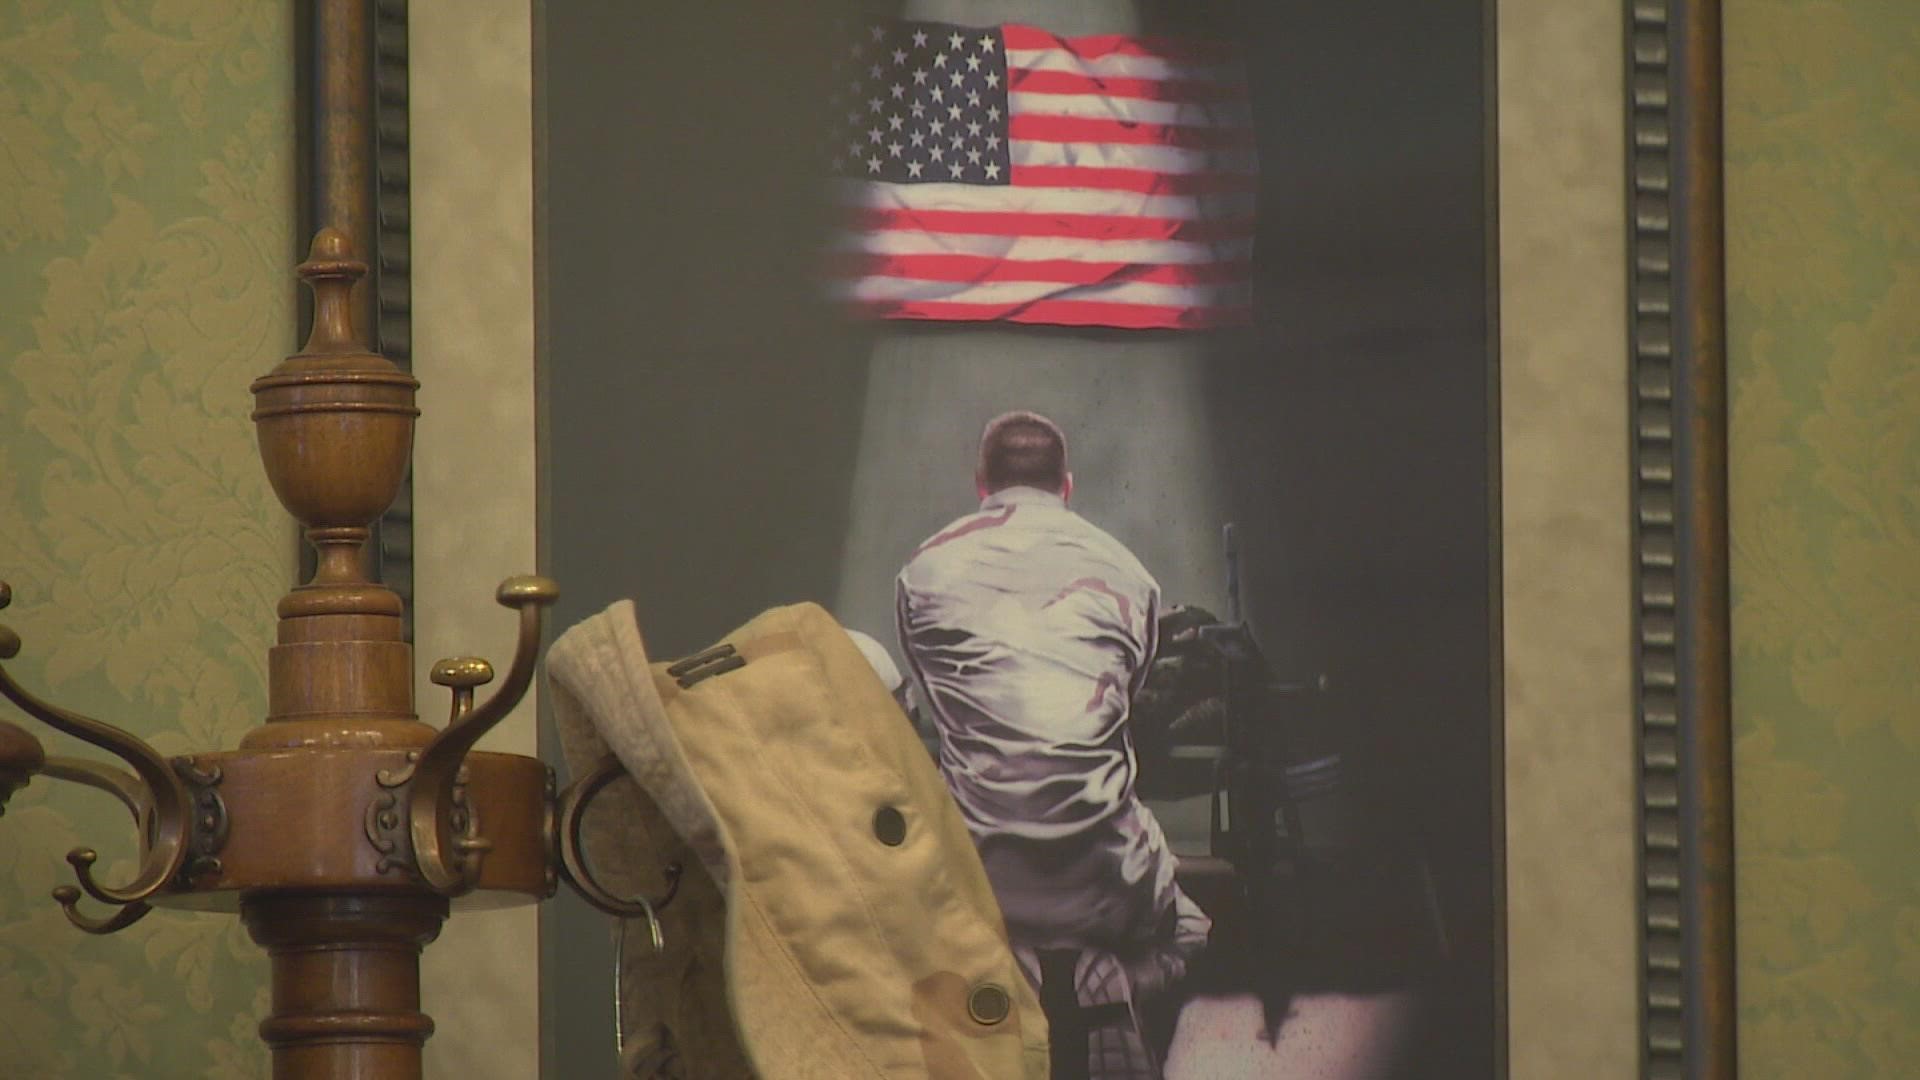 Legislation that passed Monday could result in a memorial for veterans who served in wars in Afghanistan and Iraq.